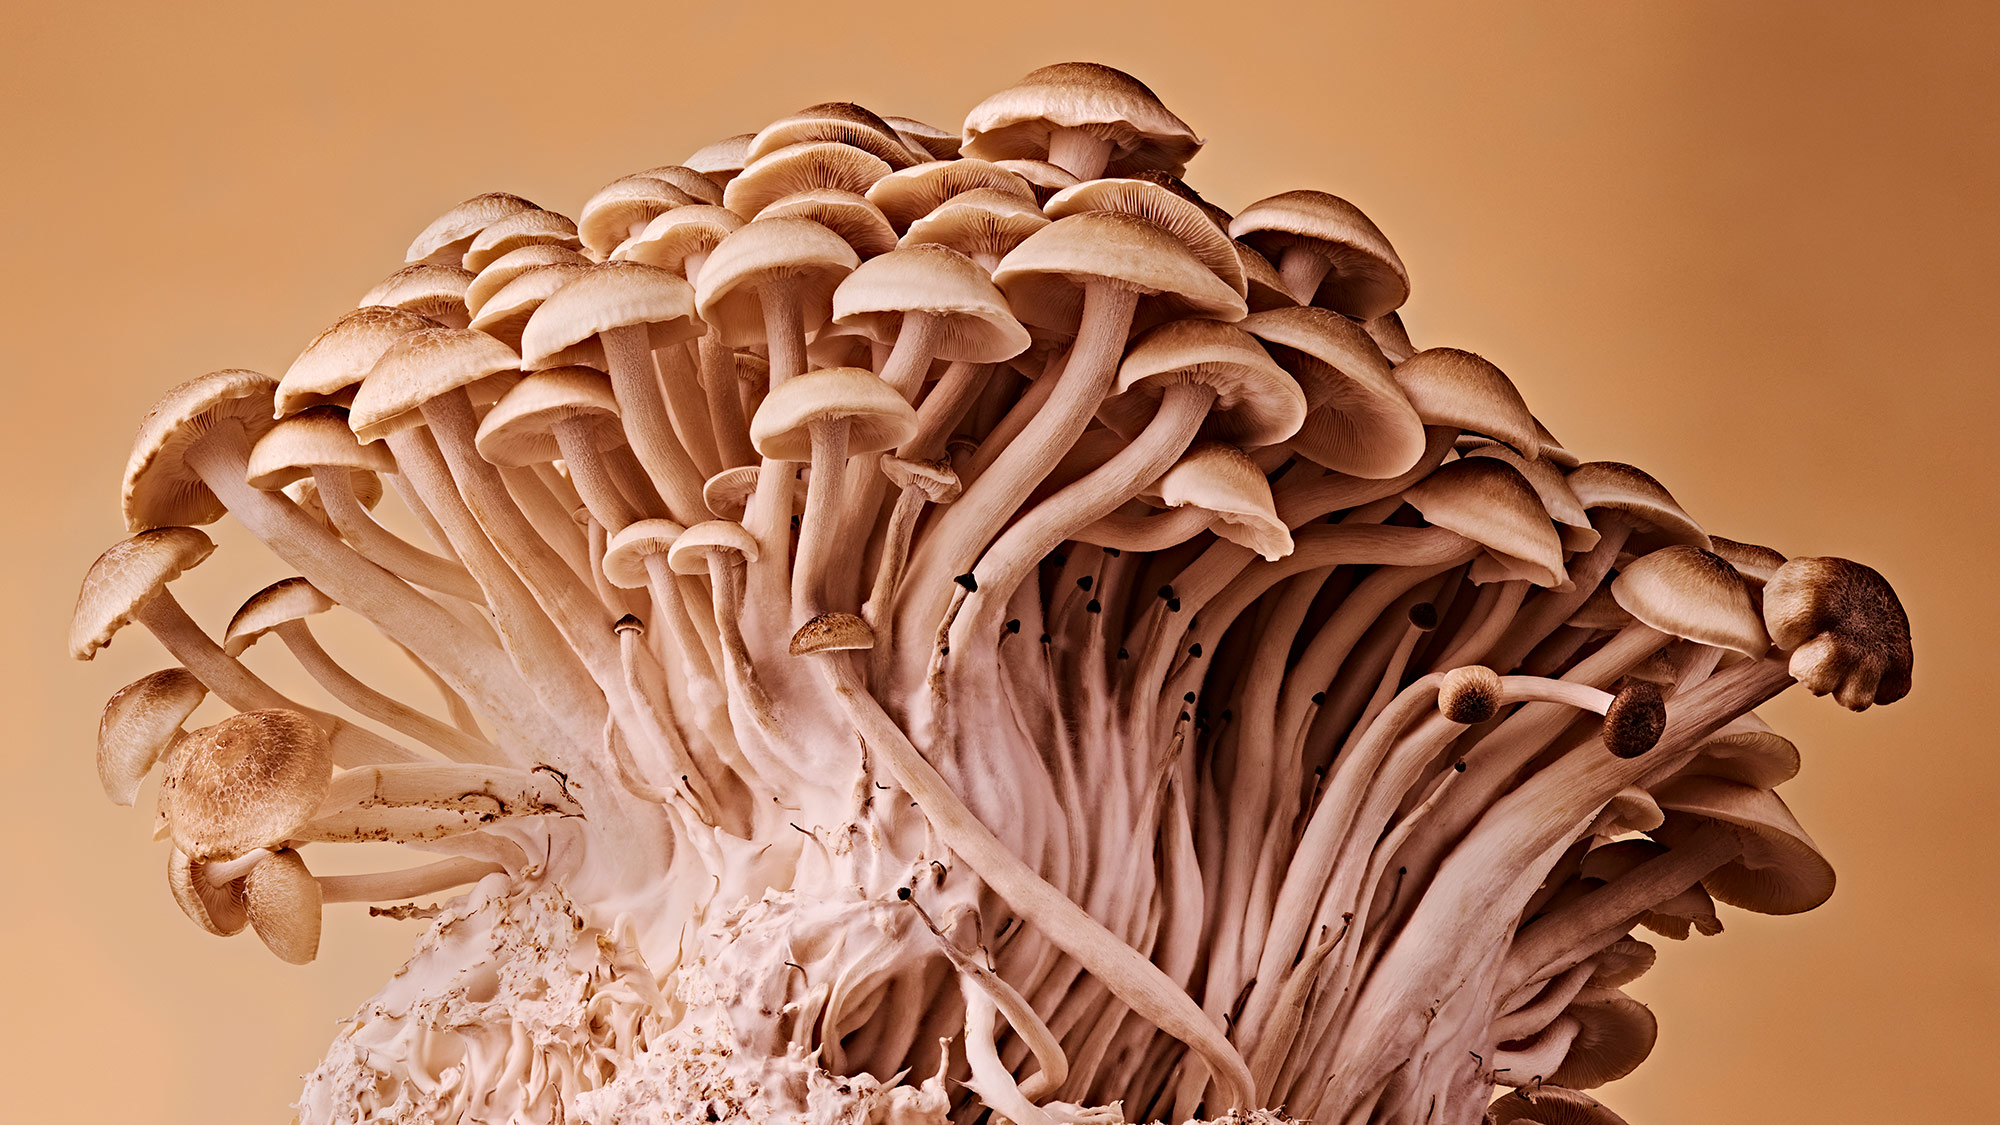 Beech mushrooms growing on a substrate against a gold background